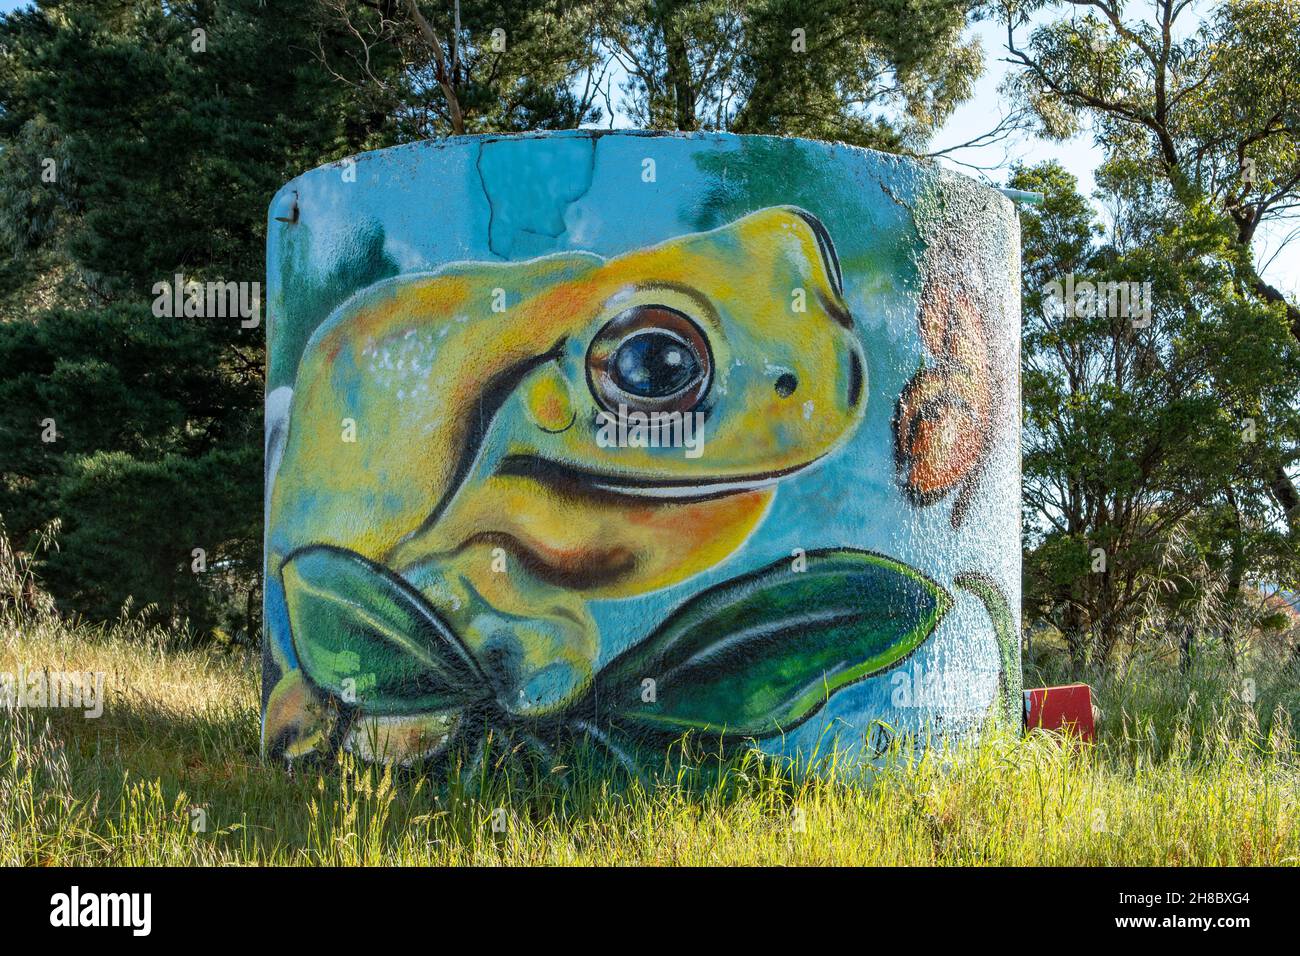 Painted Growling Frog on Water Tower, Eden Park, Victoria, Australia Stock Photo